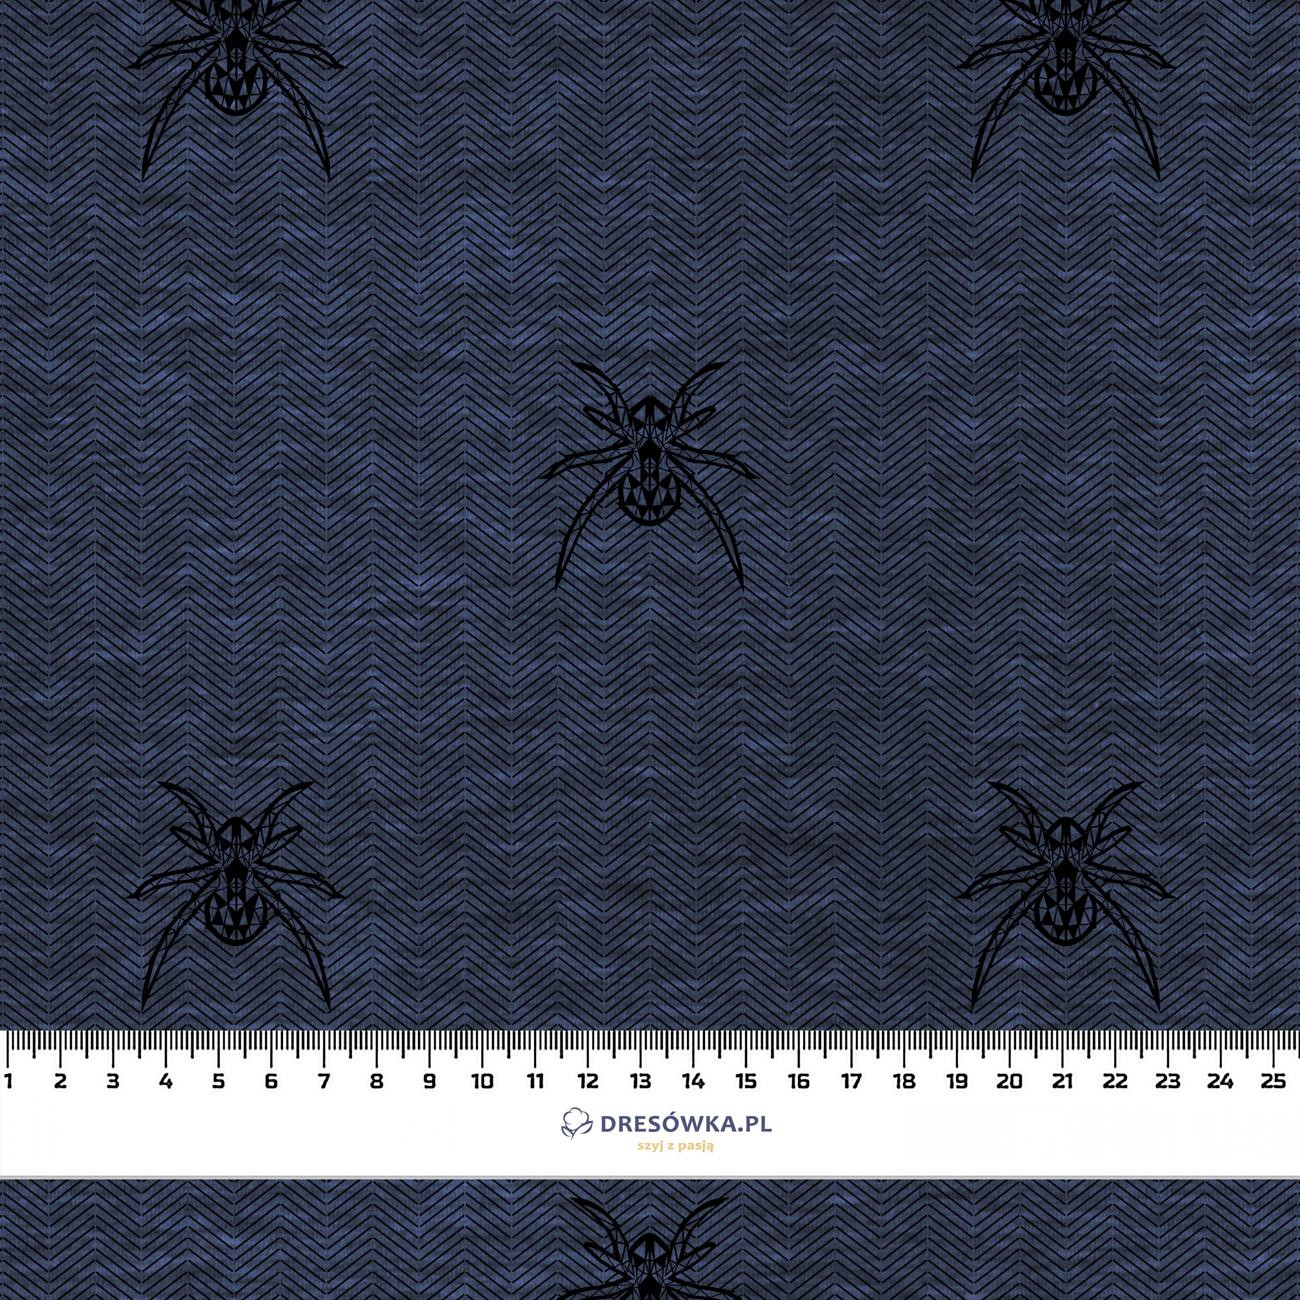 SPIDER / NIGHT CALL / jeans - Thermo lycra